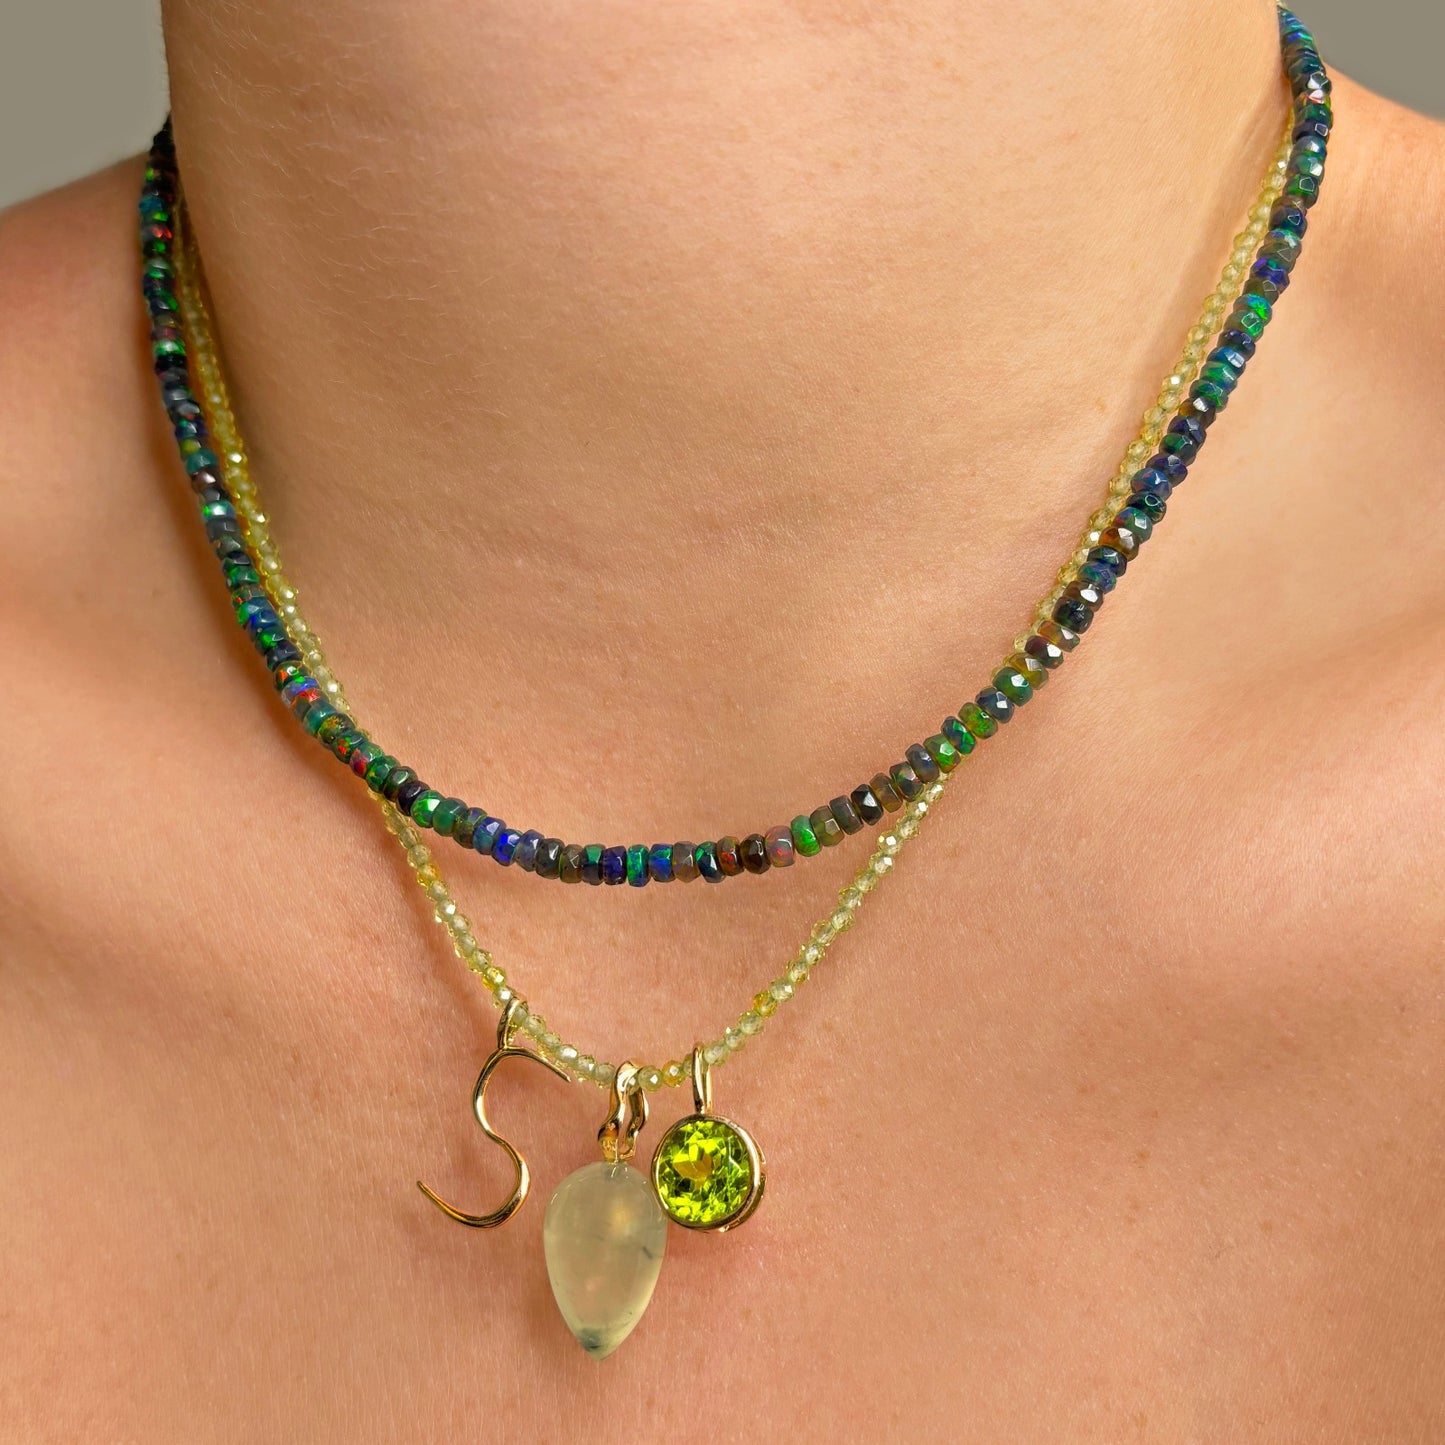 14k gold Peridot Round Solitaire Charm. Styled on a neck with an S letter and acorn charm hanging from a beaded necklace.